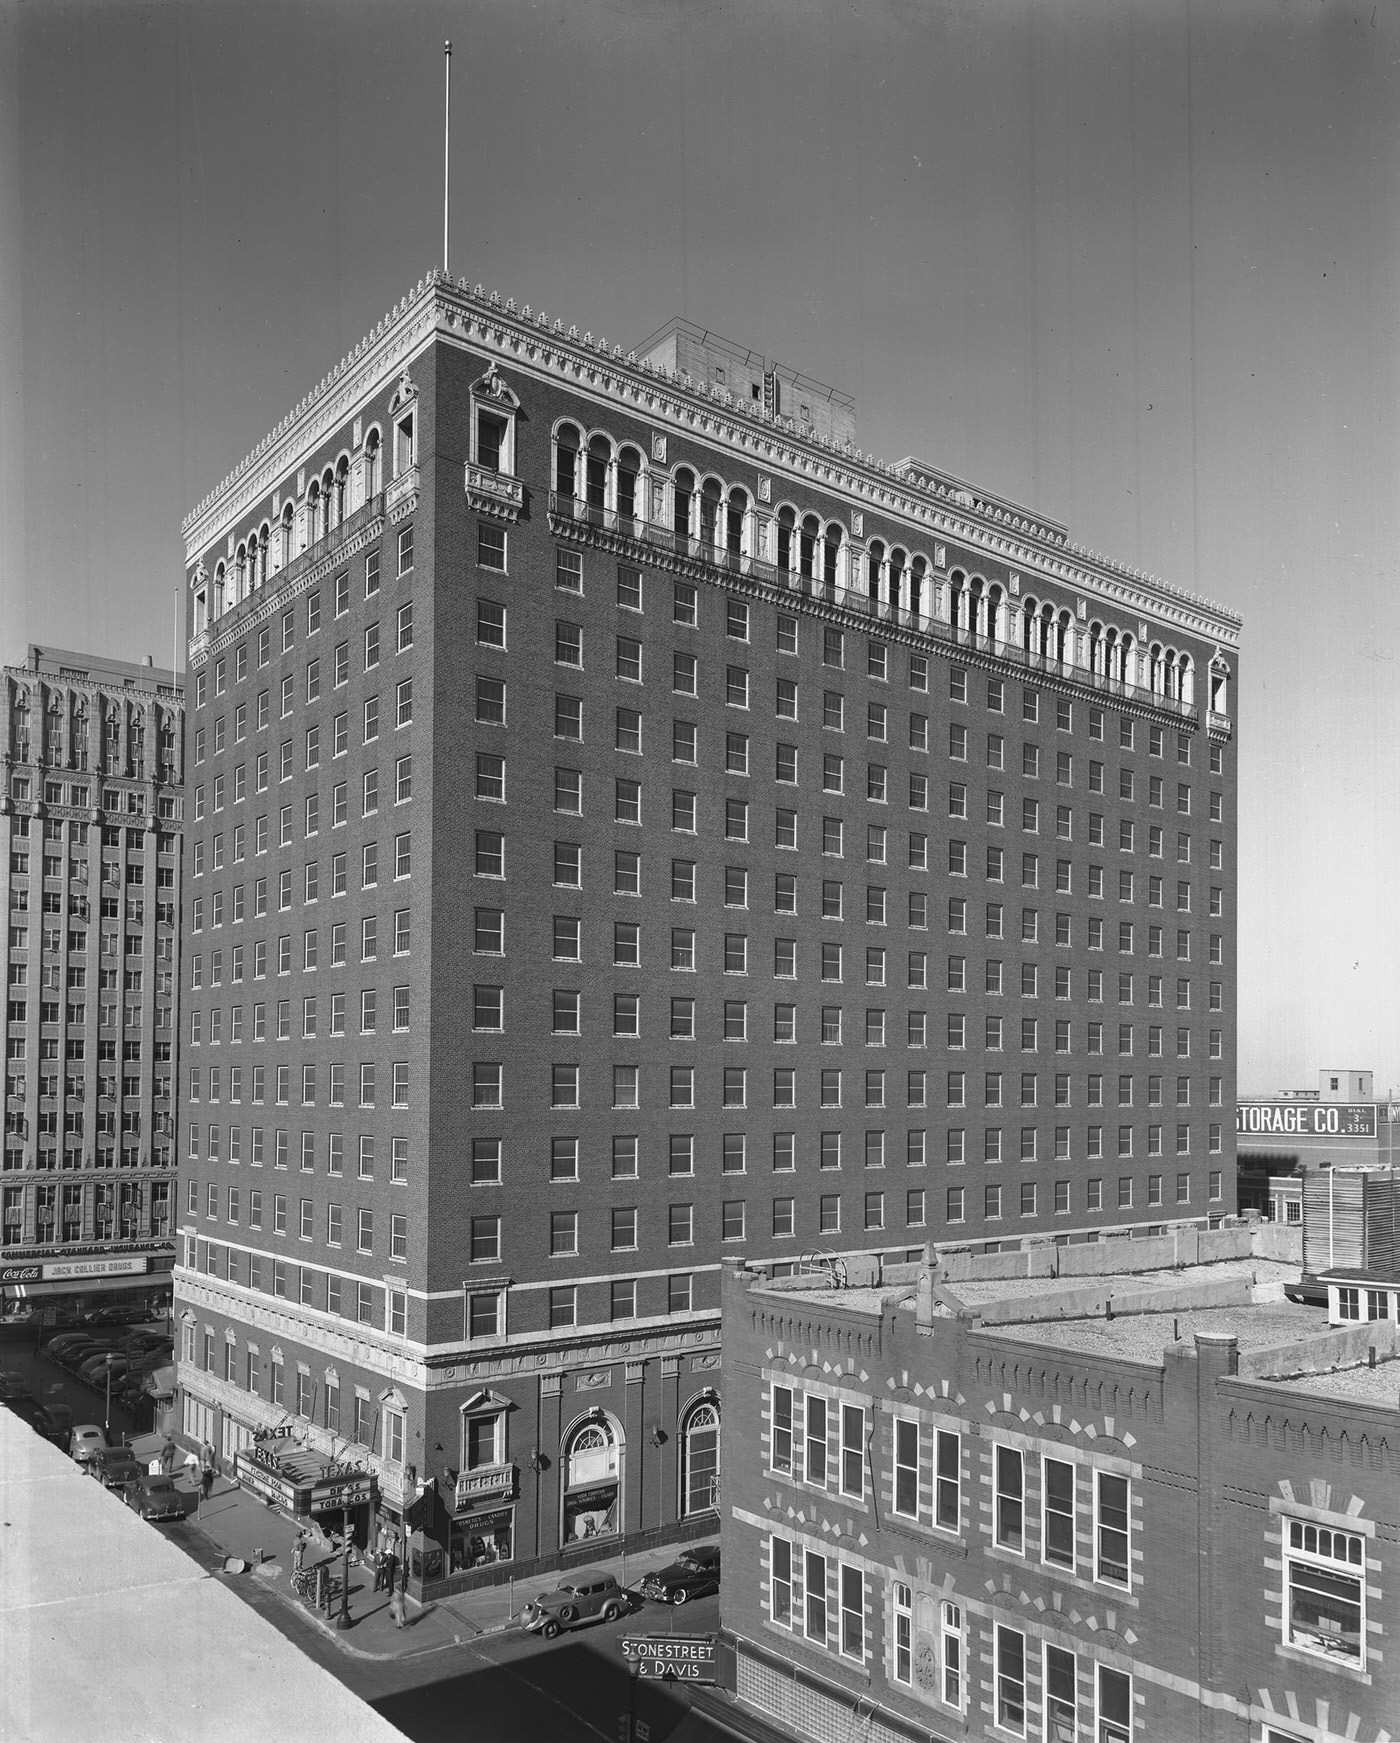 Exterior of Hotel Texas, 8th St., between Commerce and Main streets, 1948